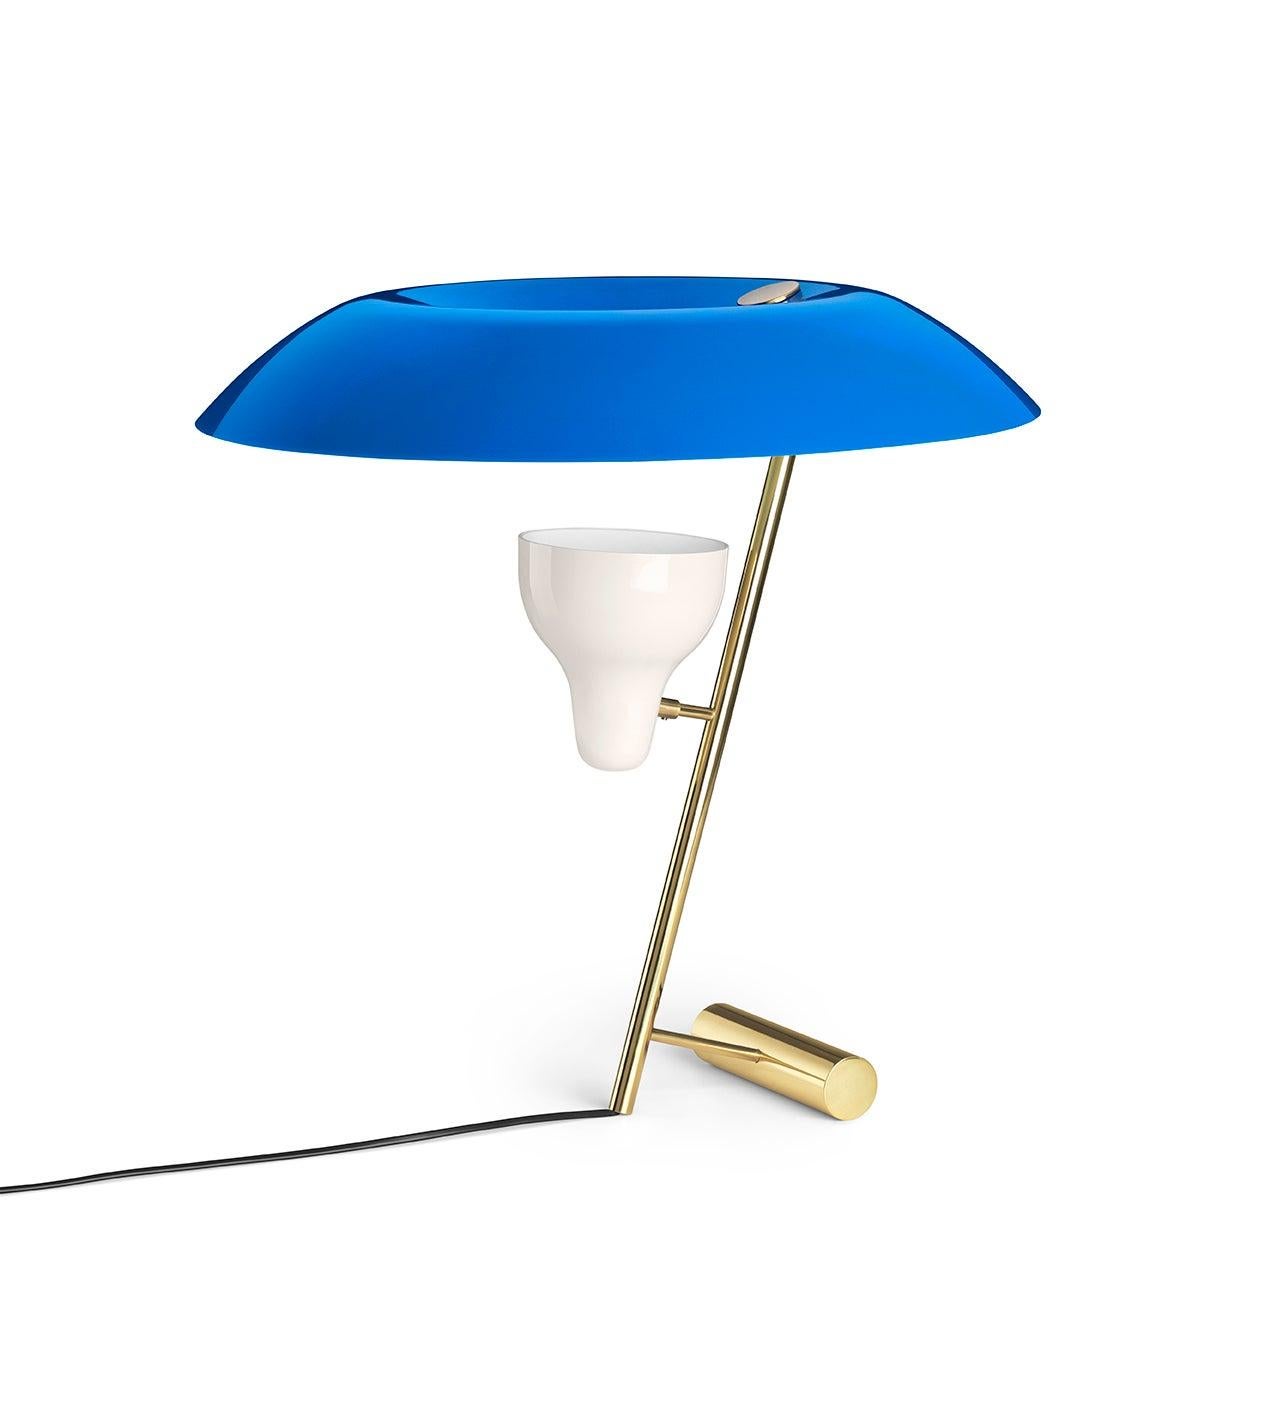 Gino Sarfatti Lamp Model 548 Polished Brass with Blue Difuser by Astep For Sale 3